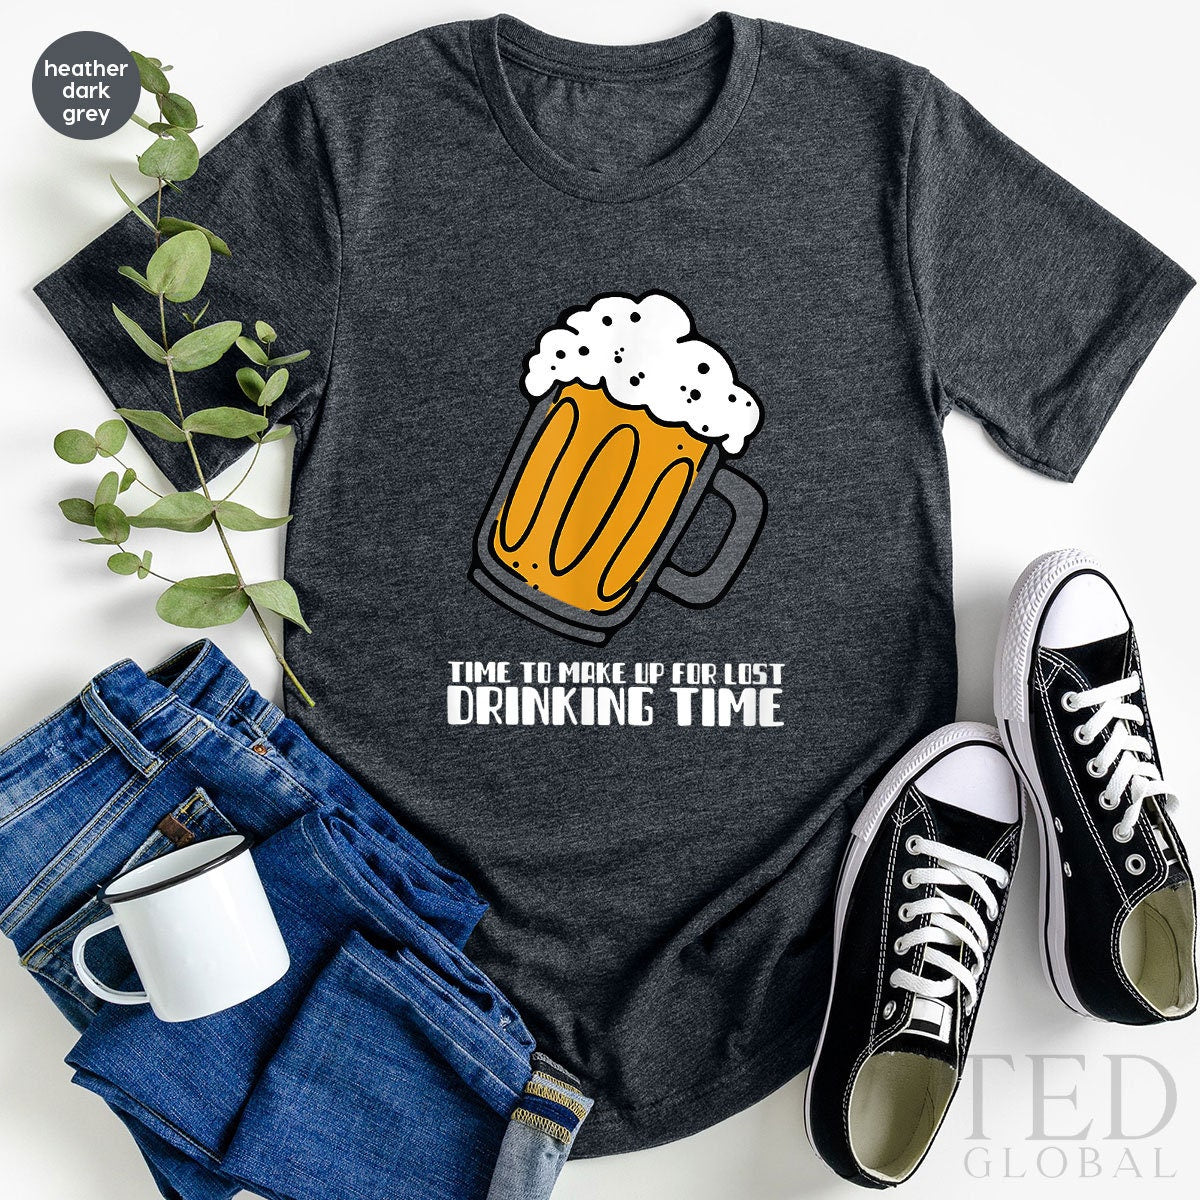 Drinking Time T-Shirt, Beer Lover T Shirt, A Cold Beer Tee, Alcohol Shirts, Drinking Day Shirt, Funny Drinker TShirt, Gift For Bartender - Fastdeliverytees.com